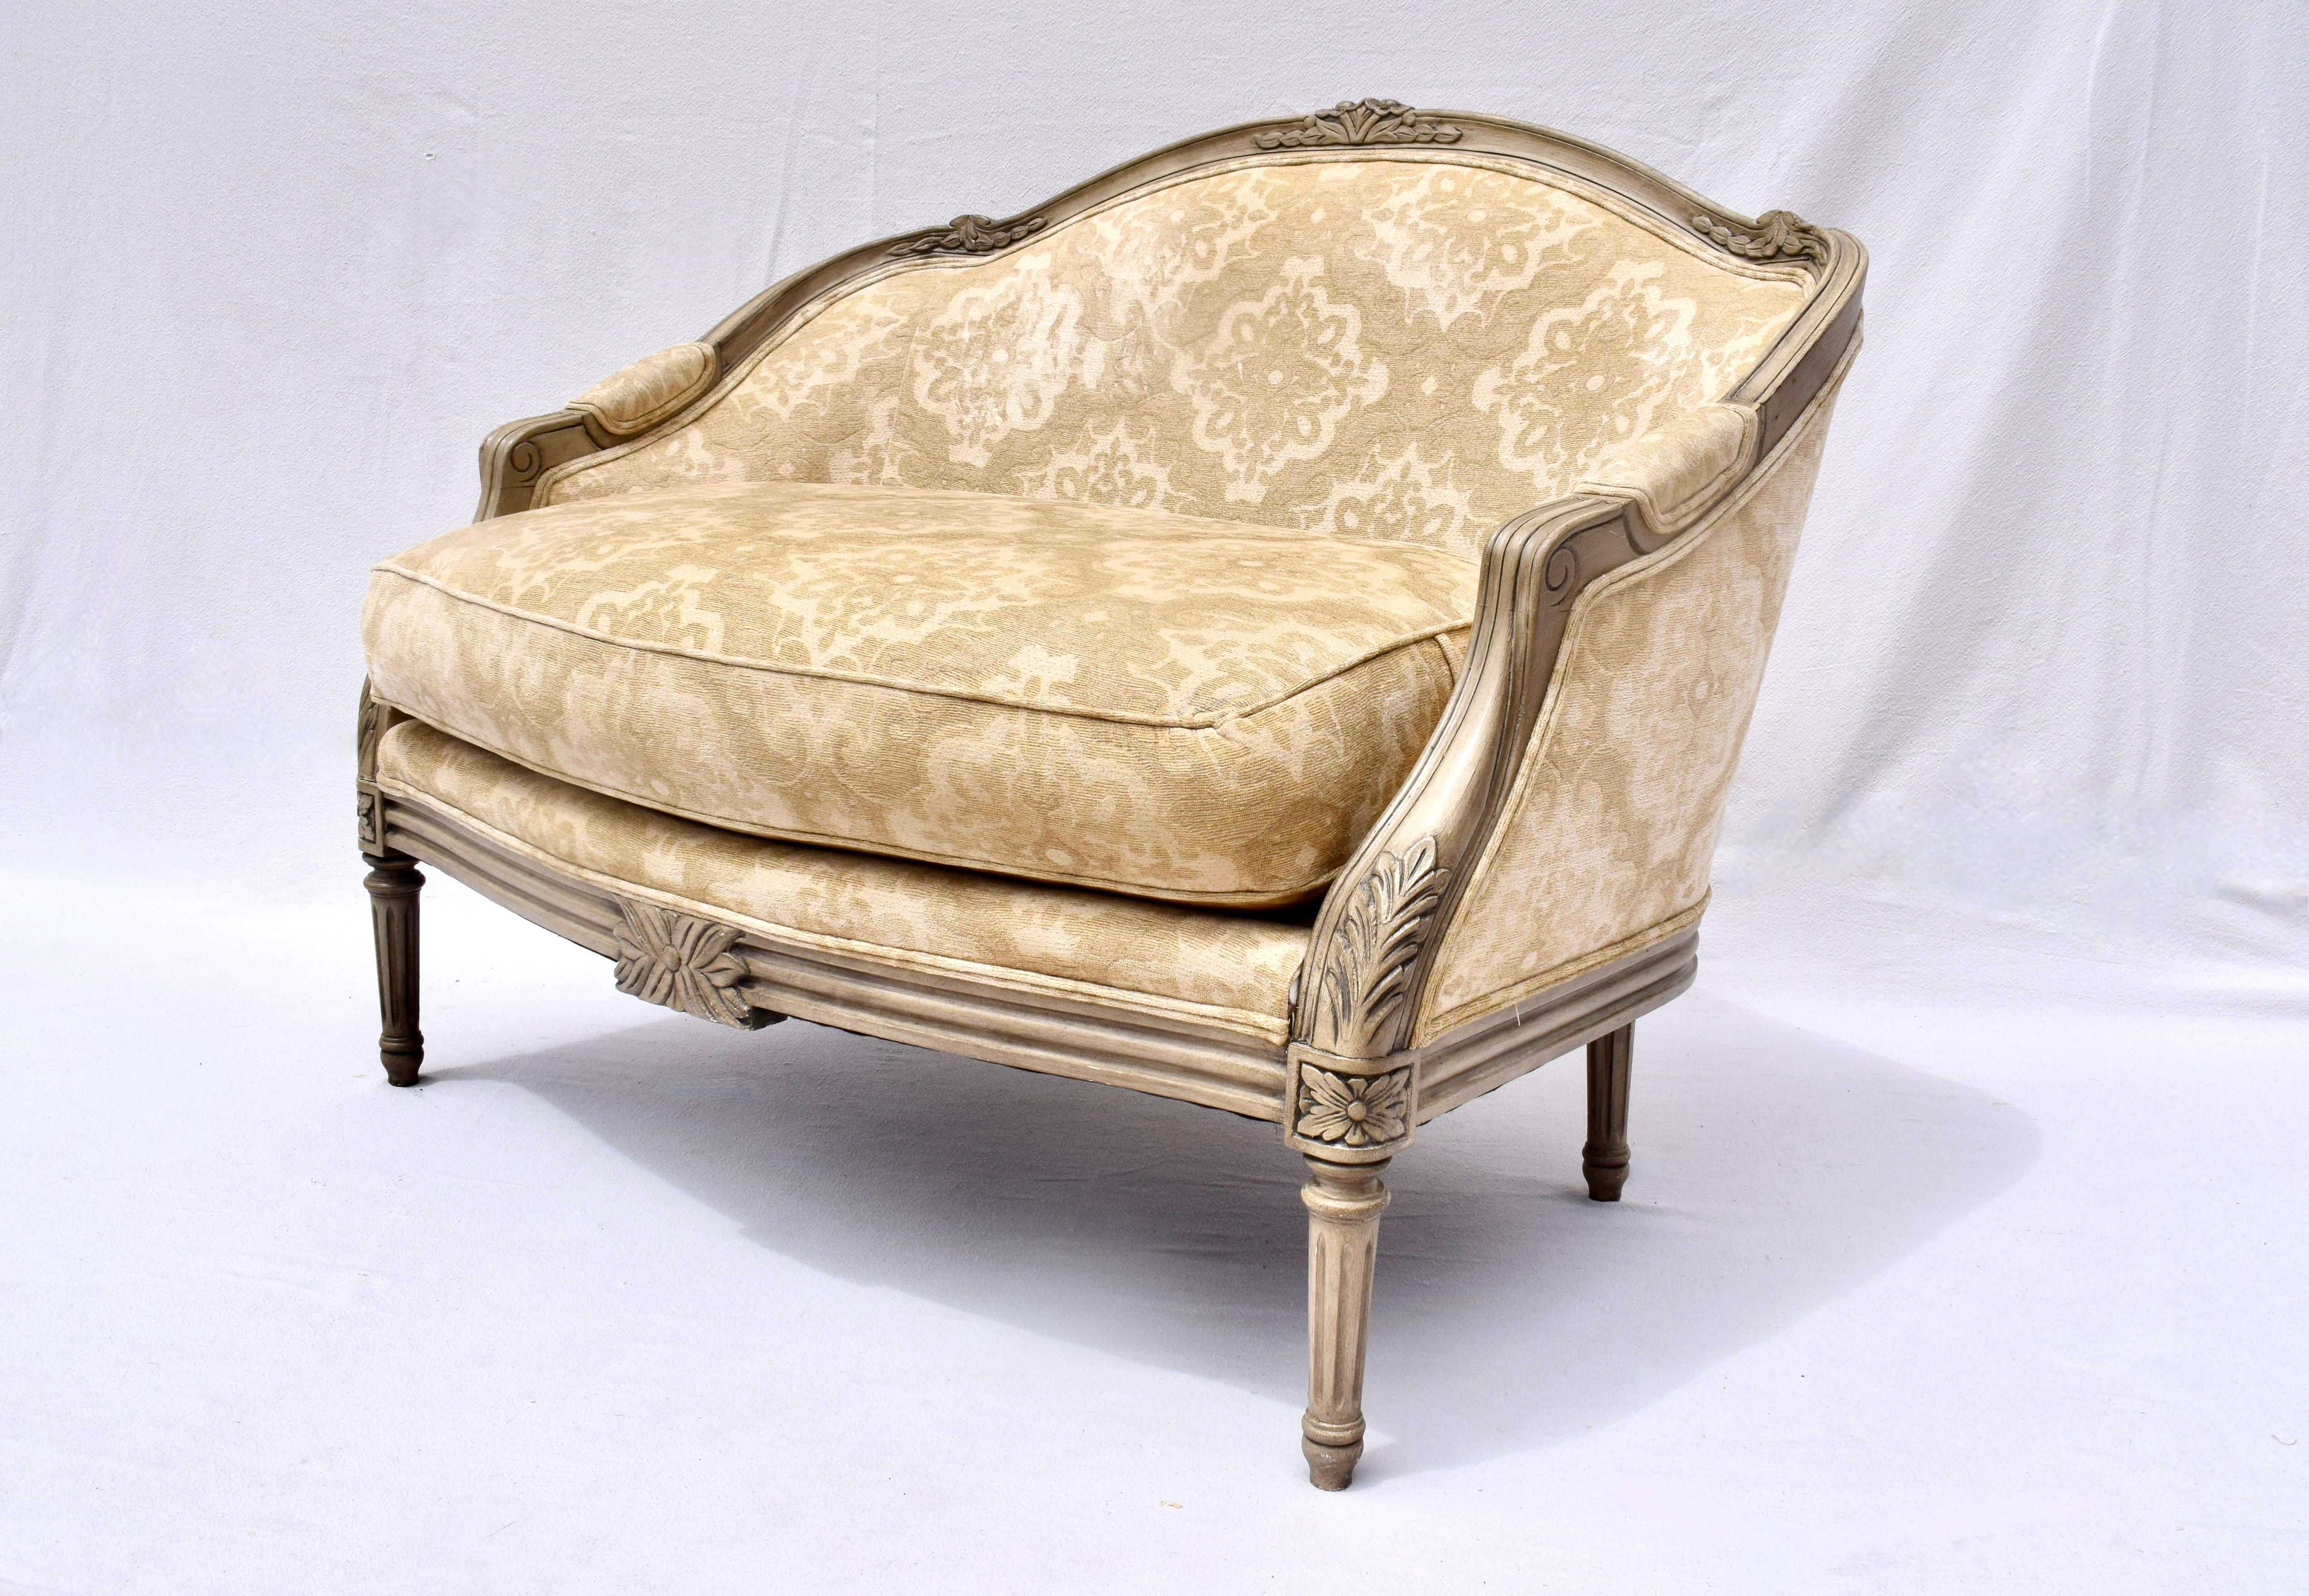 French Louis XvI Style Marquise Chair & Ottoman For Sale 3